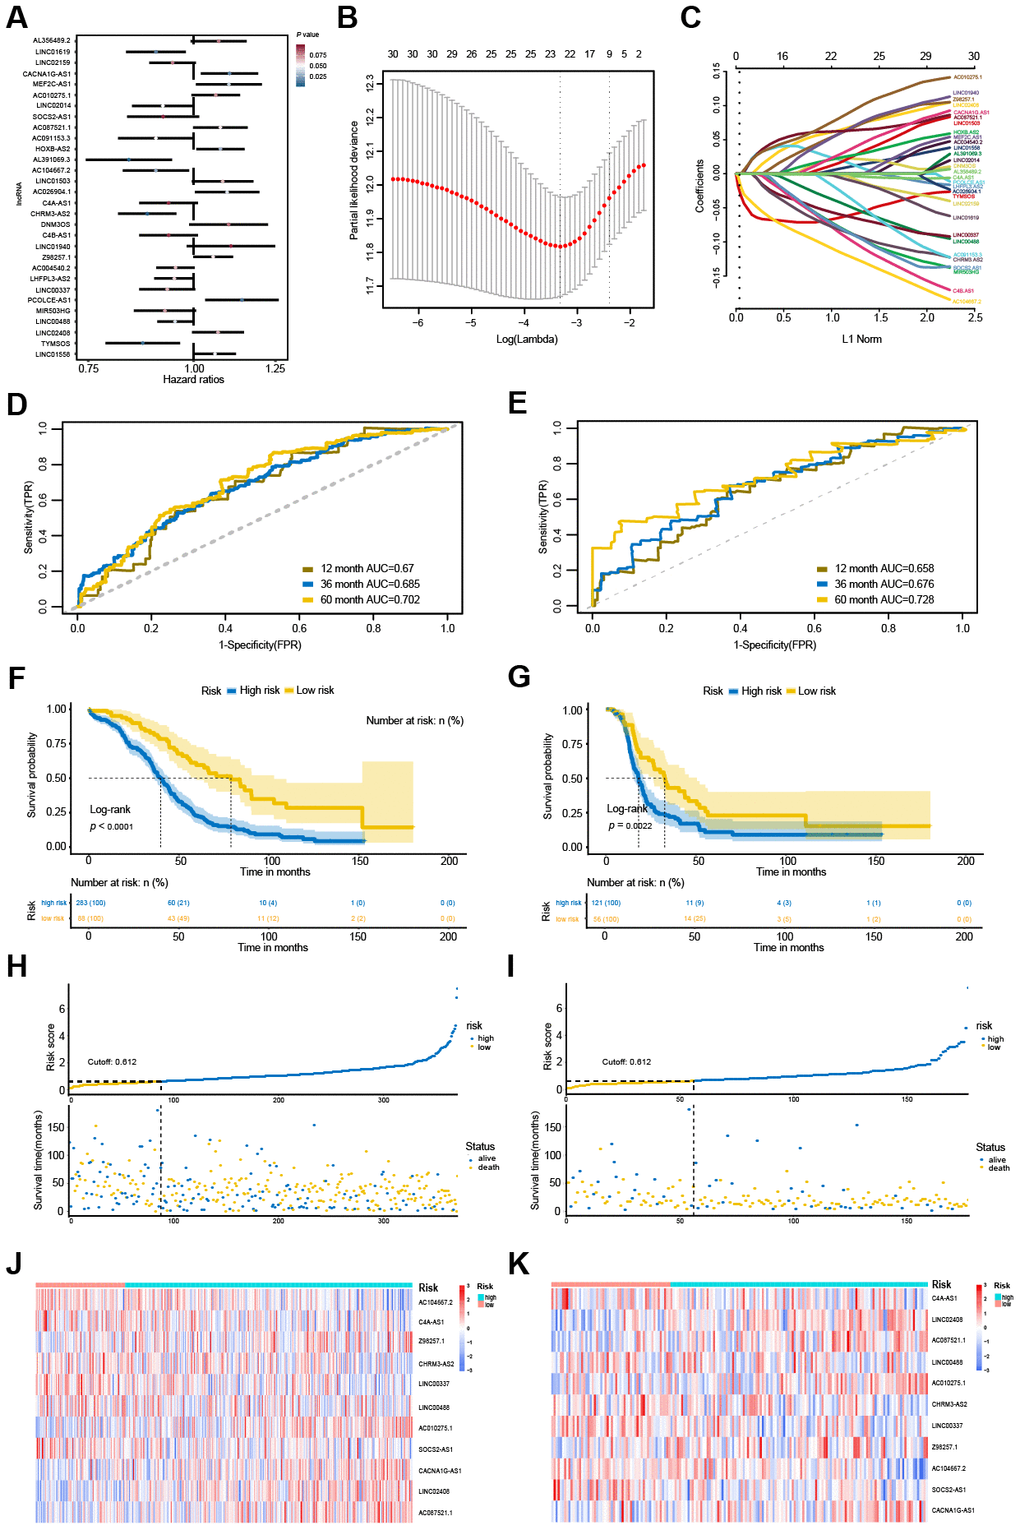 Identification and performance evaluation of the 11-lncRNA signature. (A) Forest plots of hazard ratios (HR) of the 30 potential OS-associated lncRNAs.(B) Selection of the tuning parameter (lambda) by ten-fold cross-validation based on the minimum criteria for OS. (C) The coefficient profiles of the 30 potential OS-associated lncRNAs at varying levels of penalty. (D, E) The time-dependent ROC curves of the 11-lncRNA signature in predicting OS and DFS. (F, G) Kaplan-Meier curves of patients with low or high risk in the TCGA-OS cohort and TCGA-DFS cohort. (H, I) Risk score distribution and survival status of patients in the TCGA-OS cohort and TCGA-DFS cohort. (J, K) RNA expression heat map of the 11 prognostic signature between low-risk and high-risk groups in the TCGA-OS cohort and TCGA-DFS cohort.